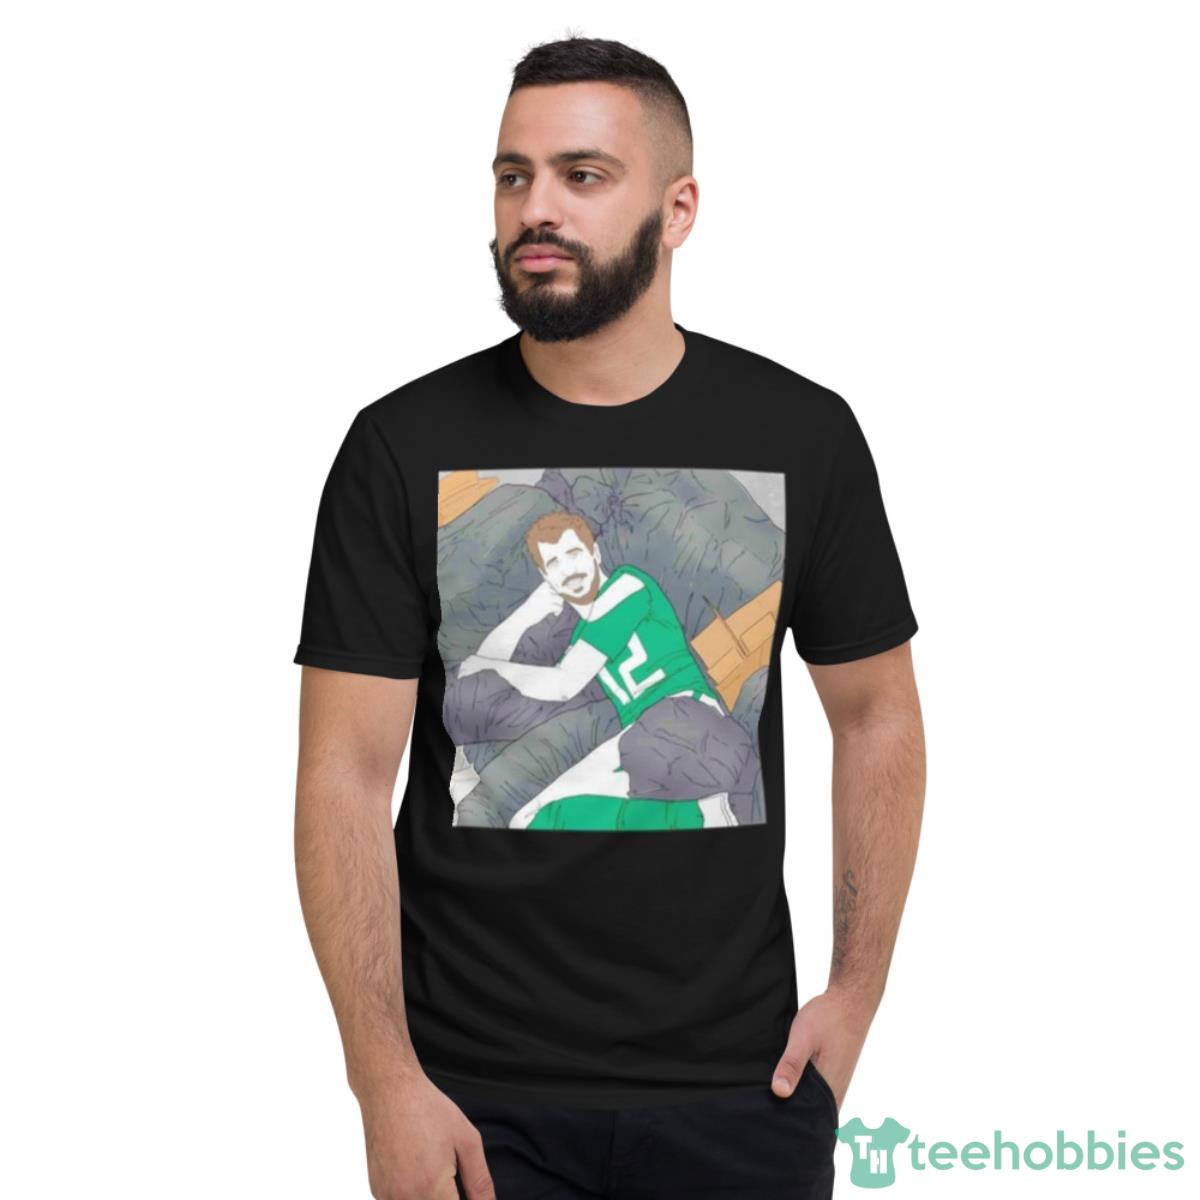 Aaron Rodgers 12 NY Jets Relaxing Shirt - Short Sleeve T-Shirt